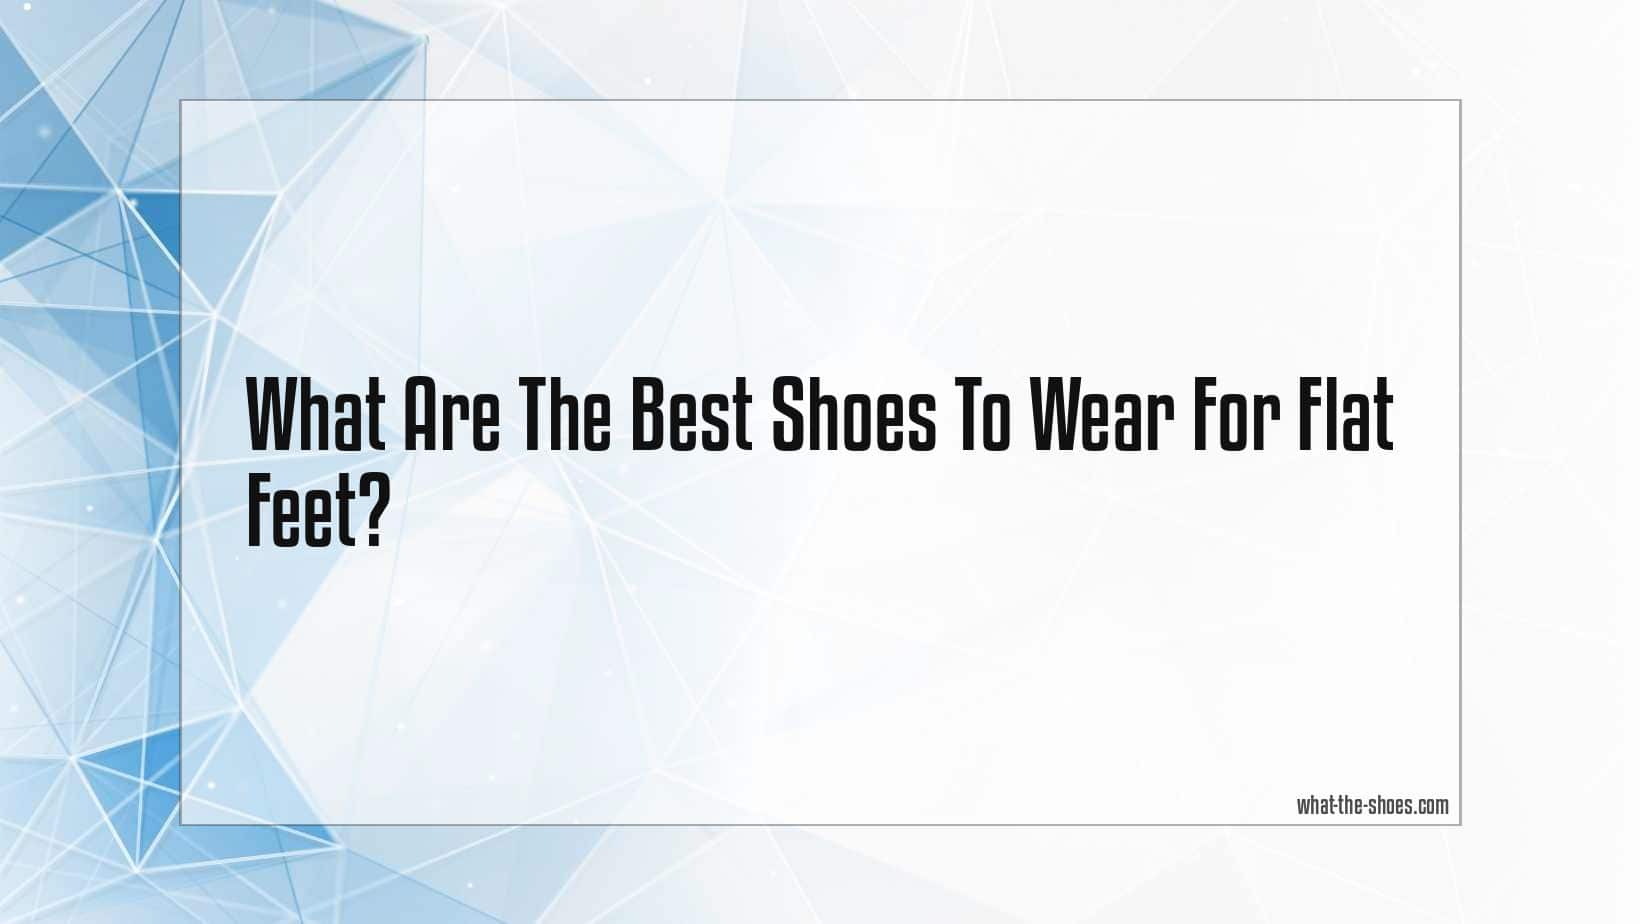 What Are The Best Shoes To Wear For Flat Feet?